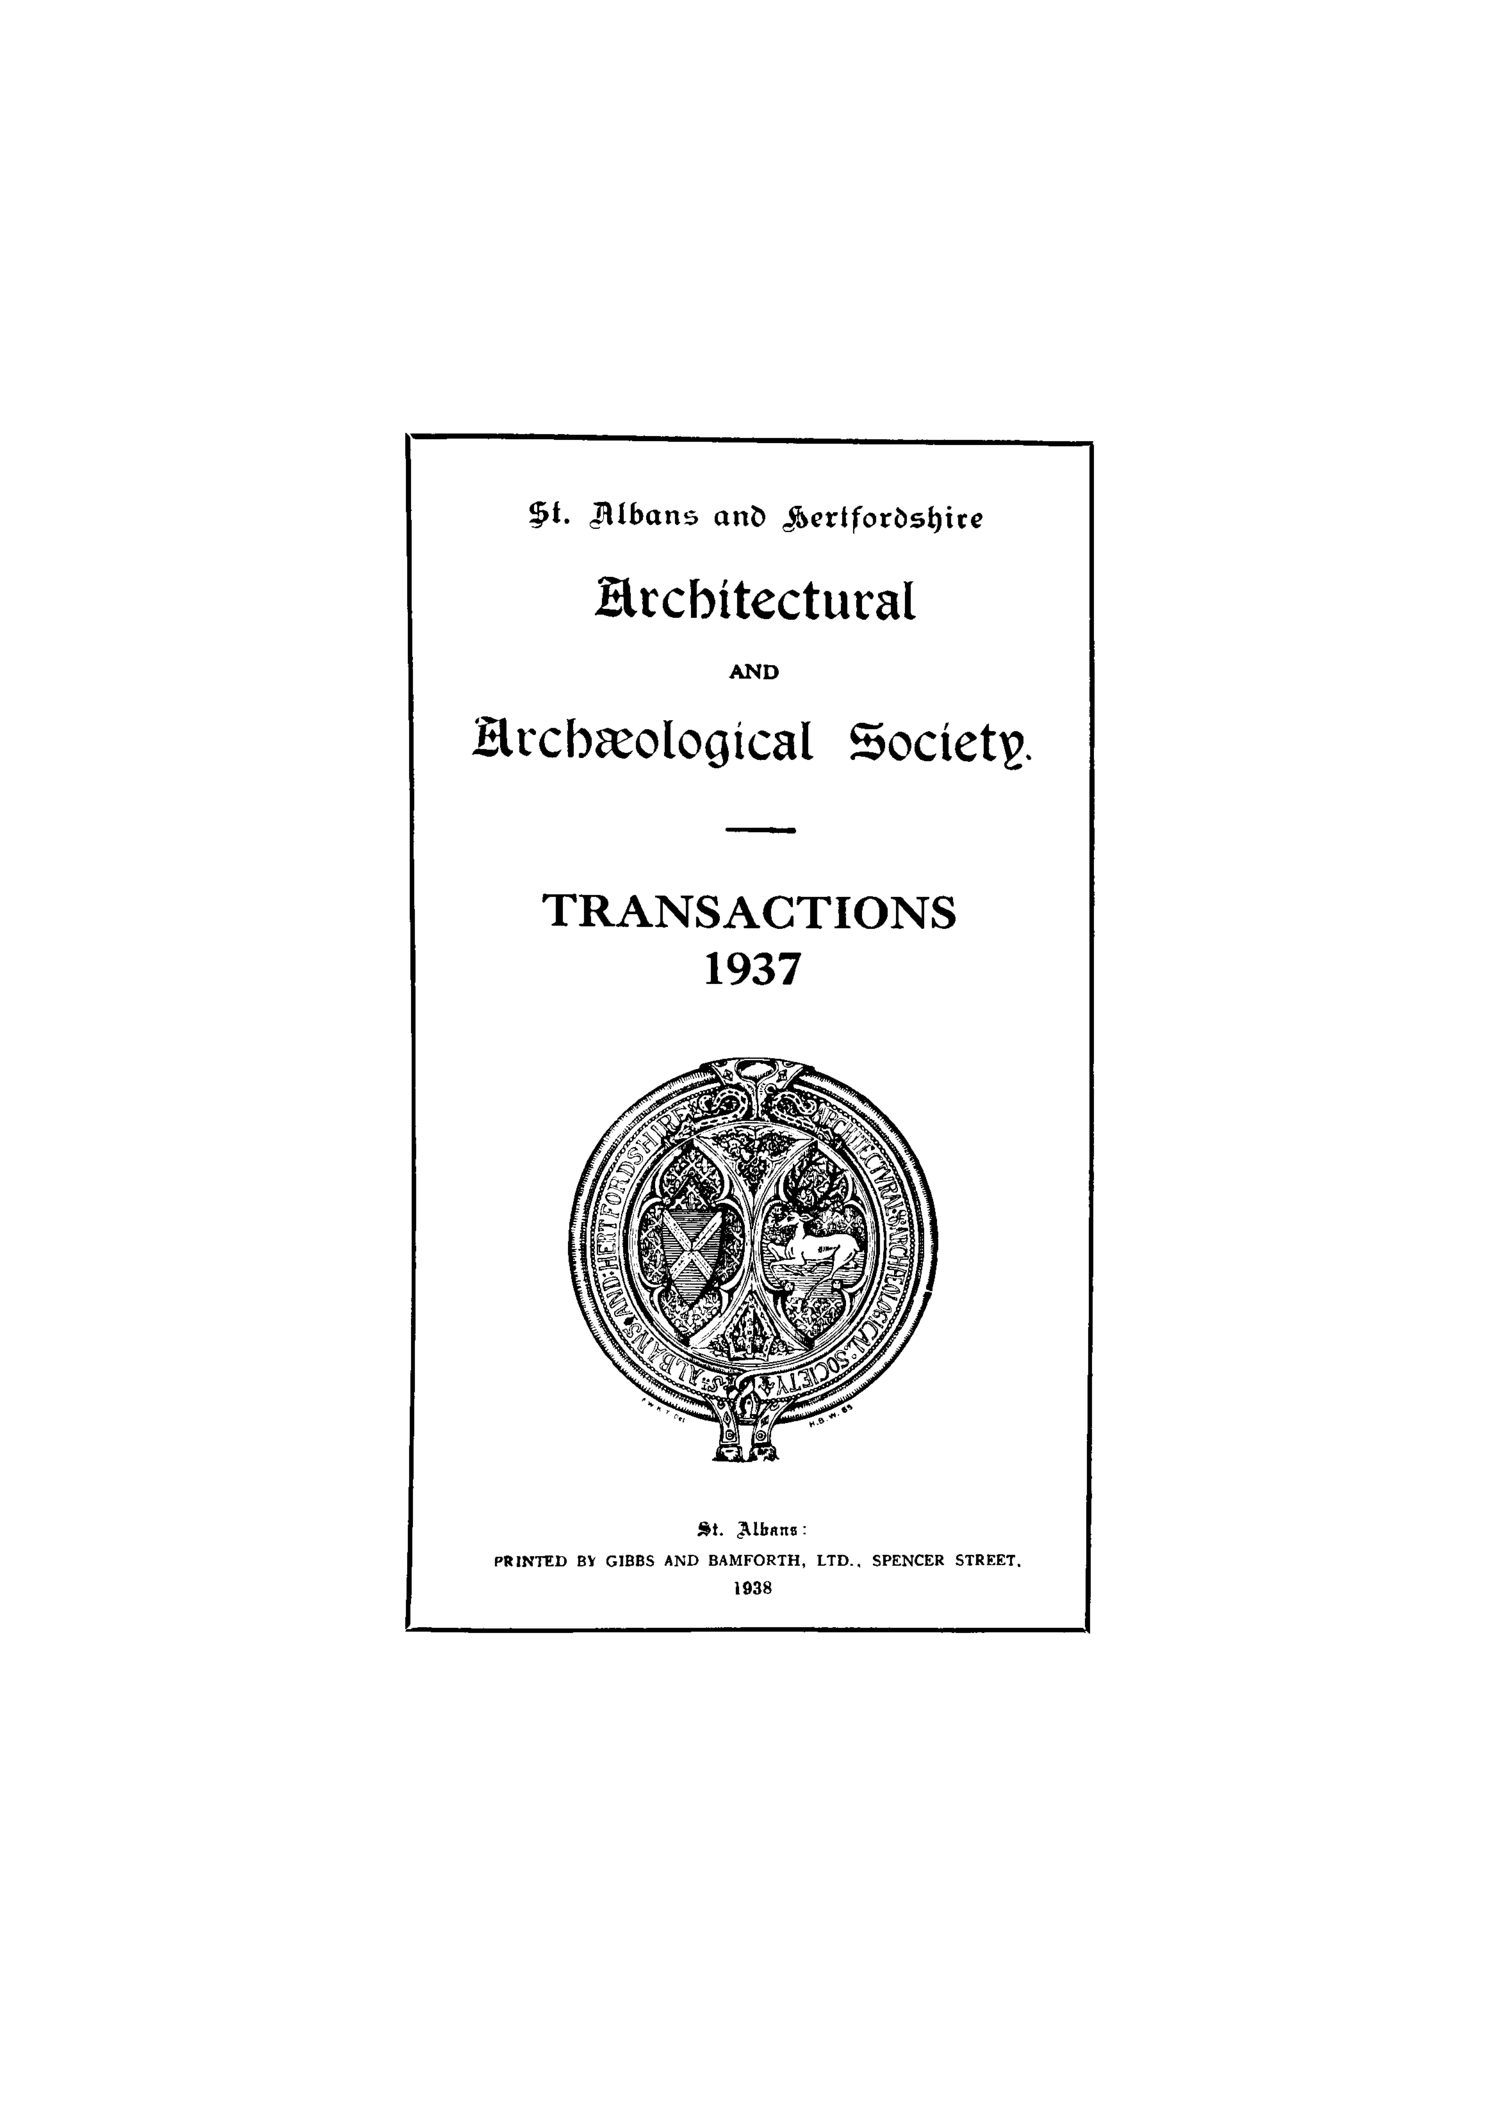 Transactions of the Society (1937)